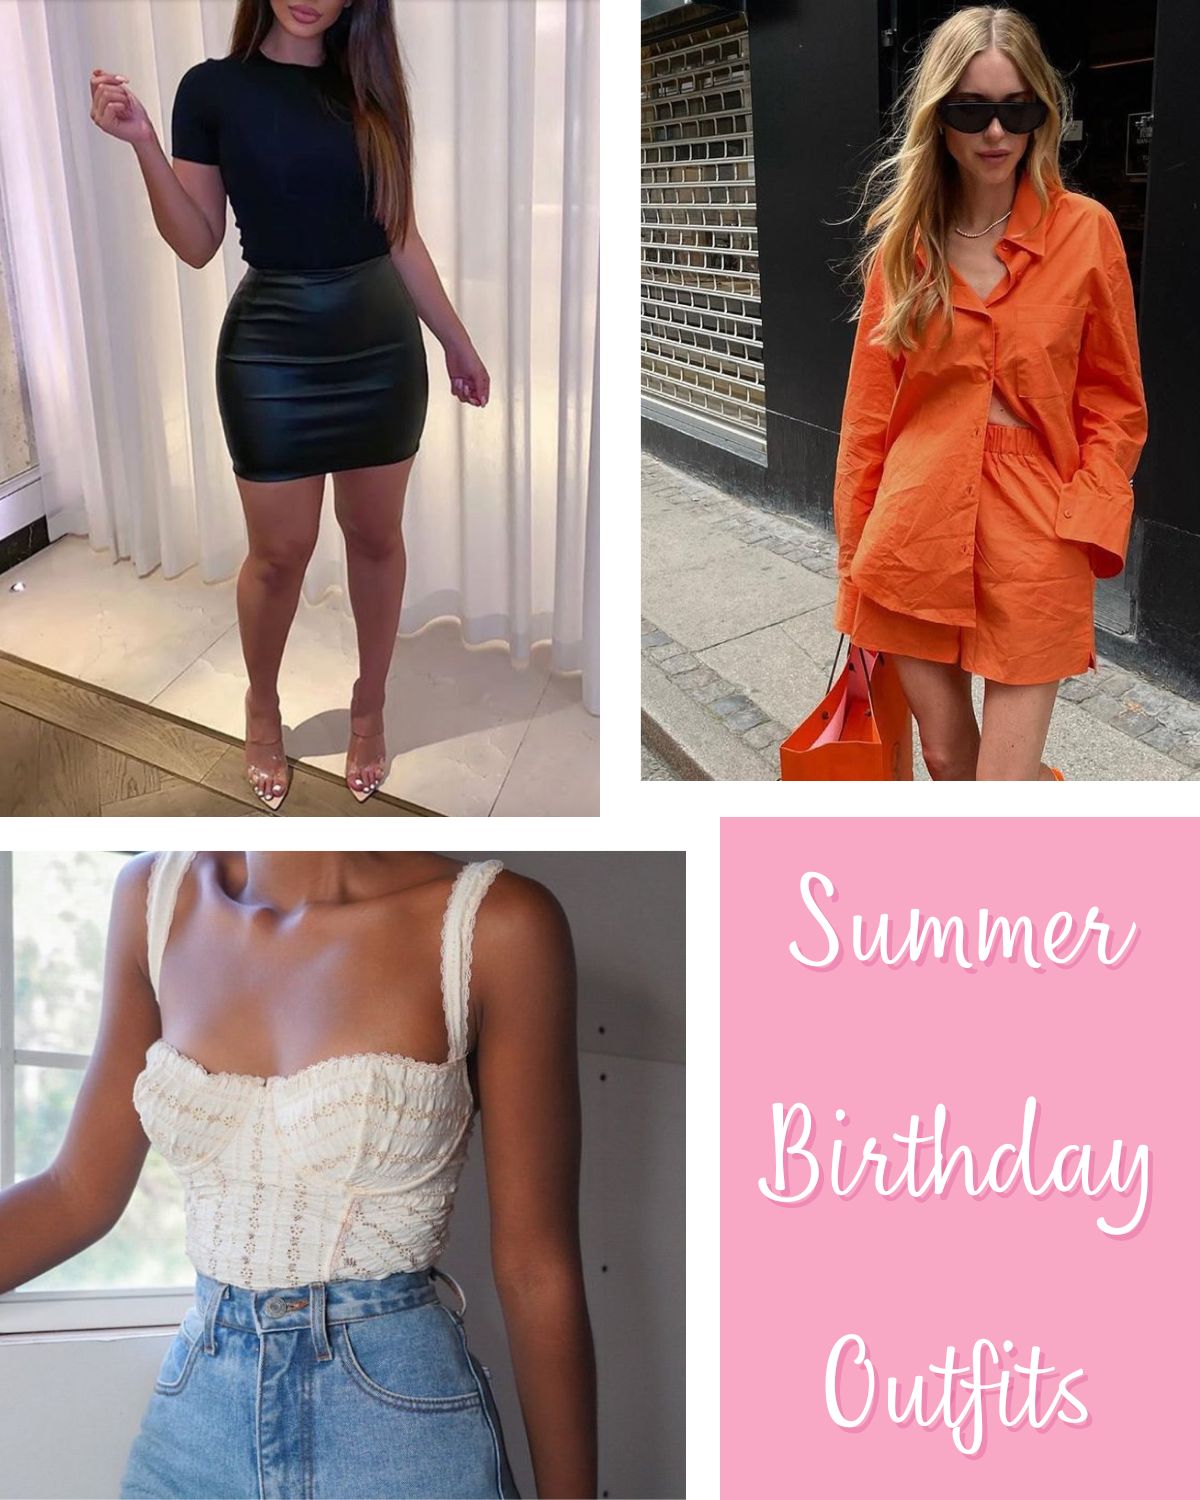 Summer outfits perfect for celebrating. A girl in an orange set, a white corset top, and a black skirt and top combo